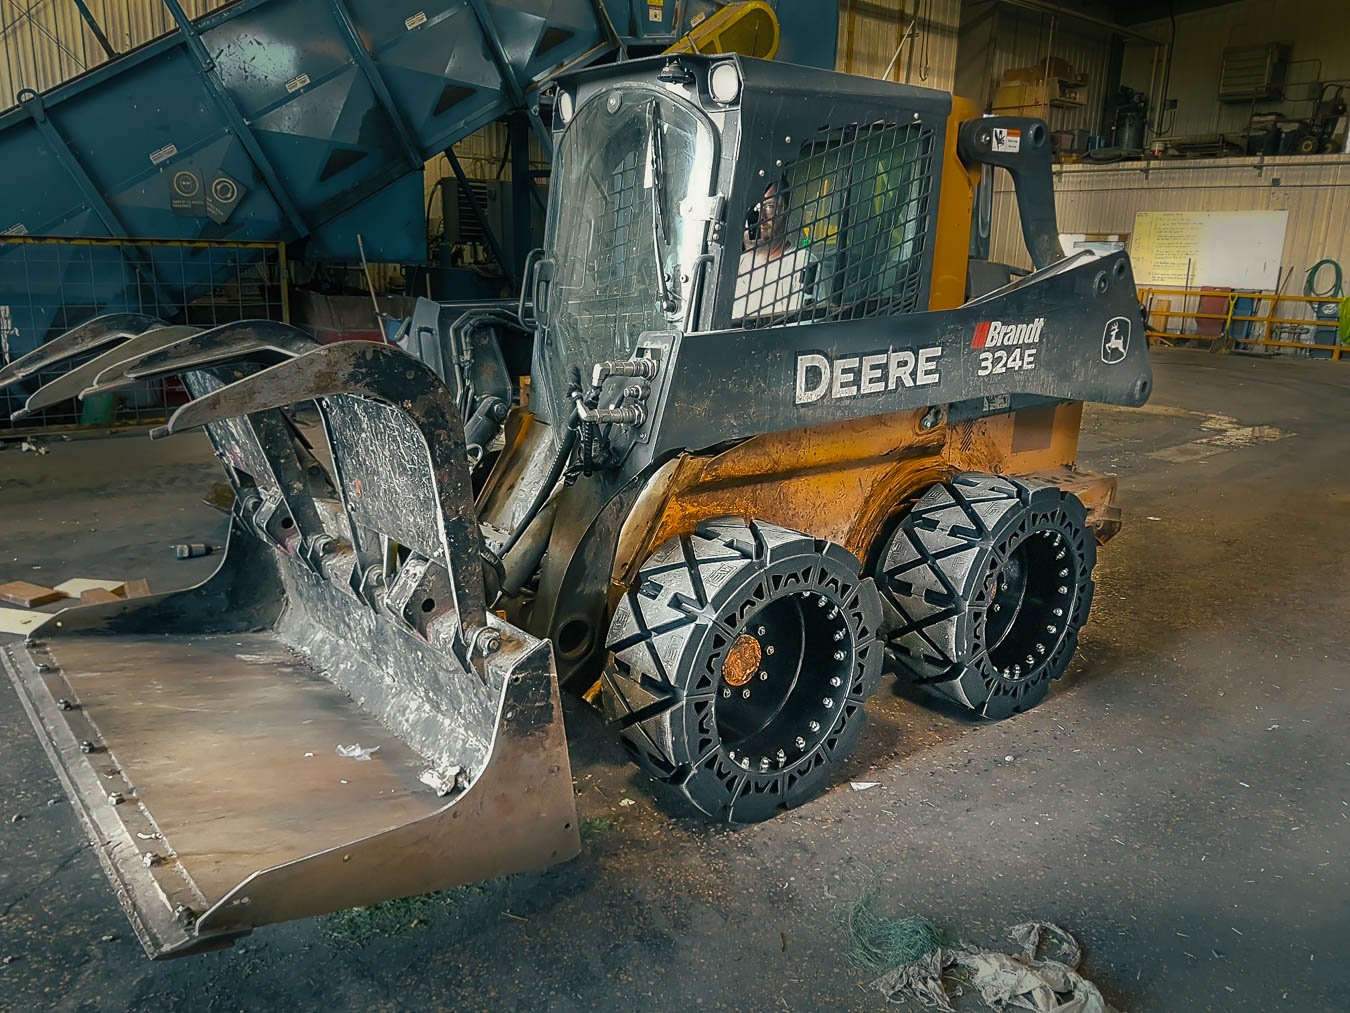 This image shows a DEERE 324E with our 12x16 5 Bobcat Tires